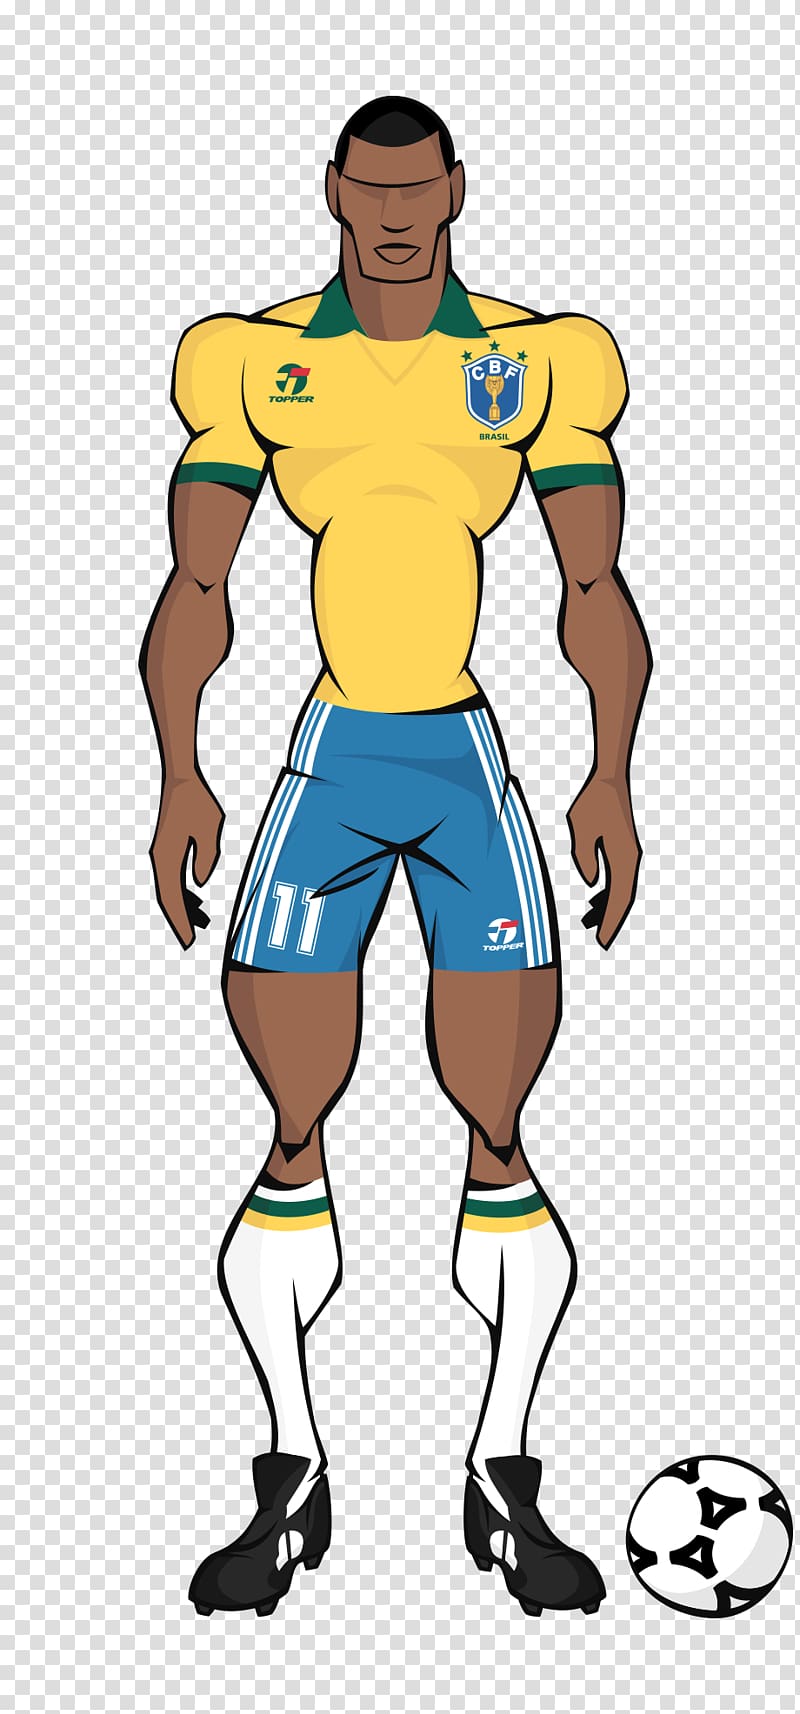 Brazil national football team Ricardo Gomes Brazil at the 1990 FIFA World Cup Brazil at the 1994 FIFA World Cup, brazil transparent background PNG clipart